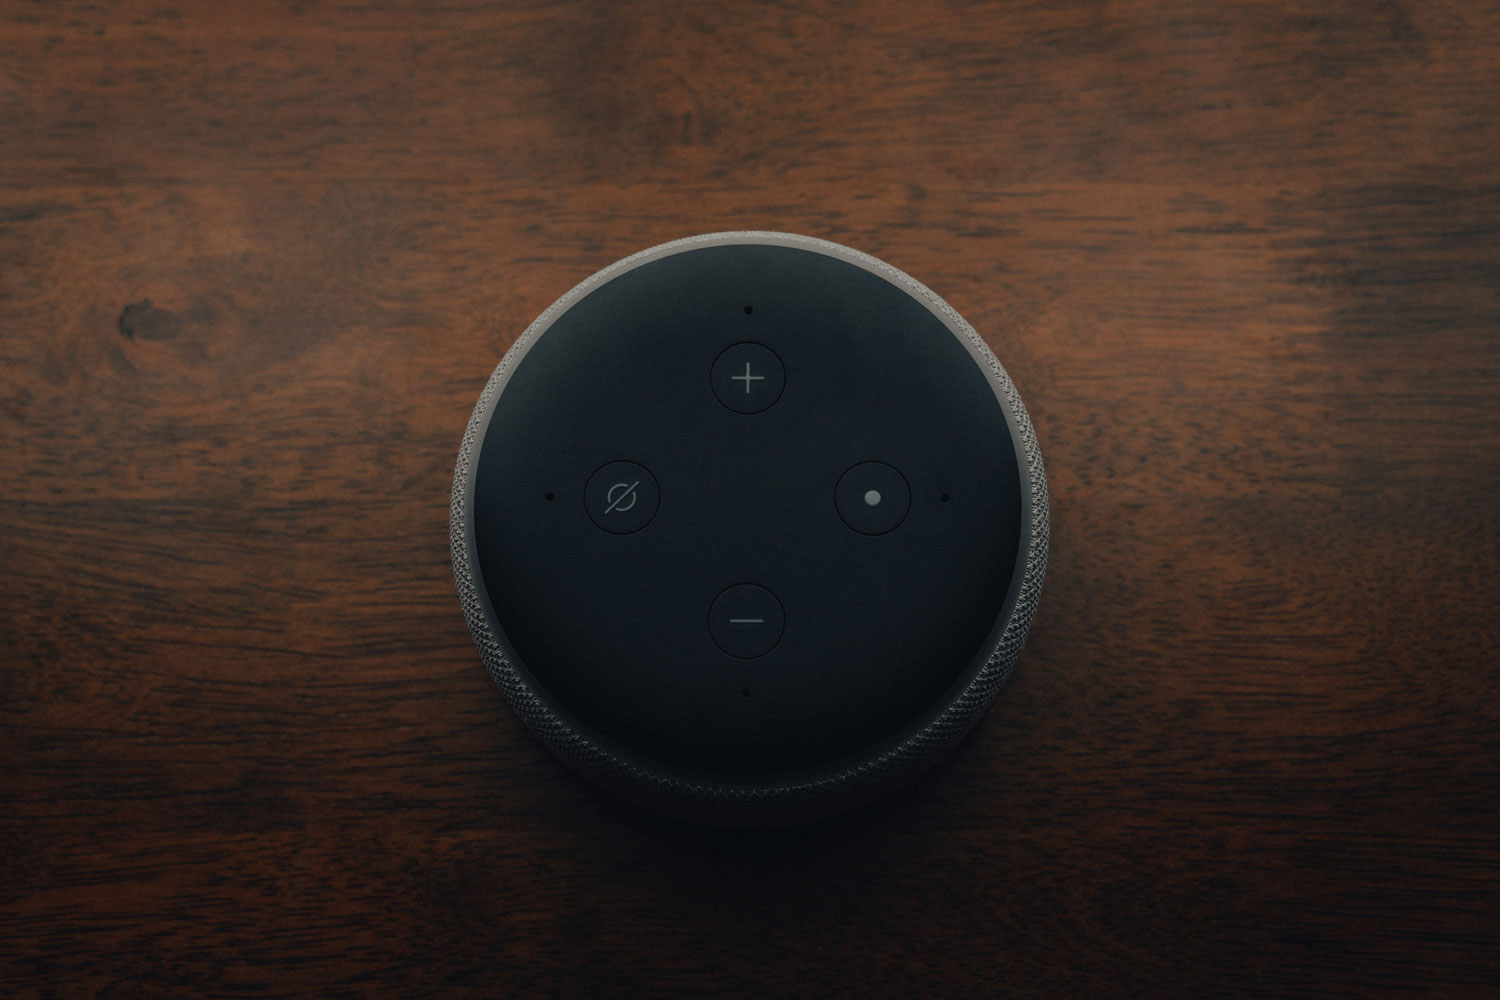 Background image showing an Amazon Echo device. Photo by Mark Farias, available on Unsplash.